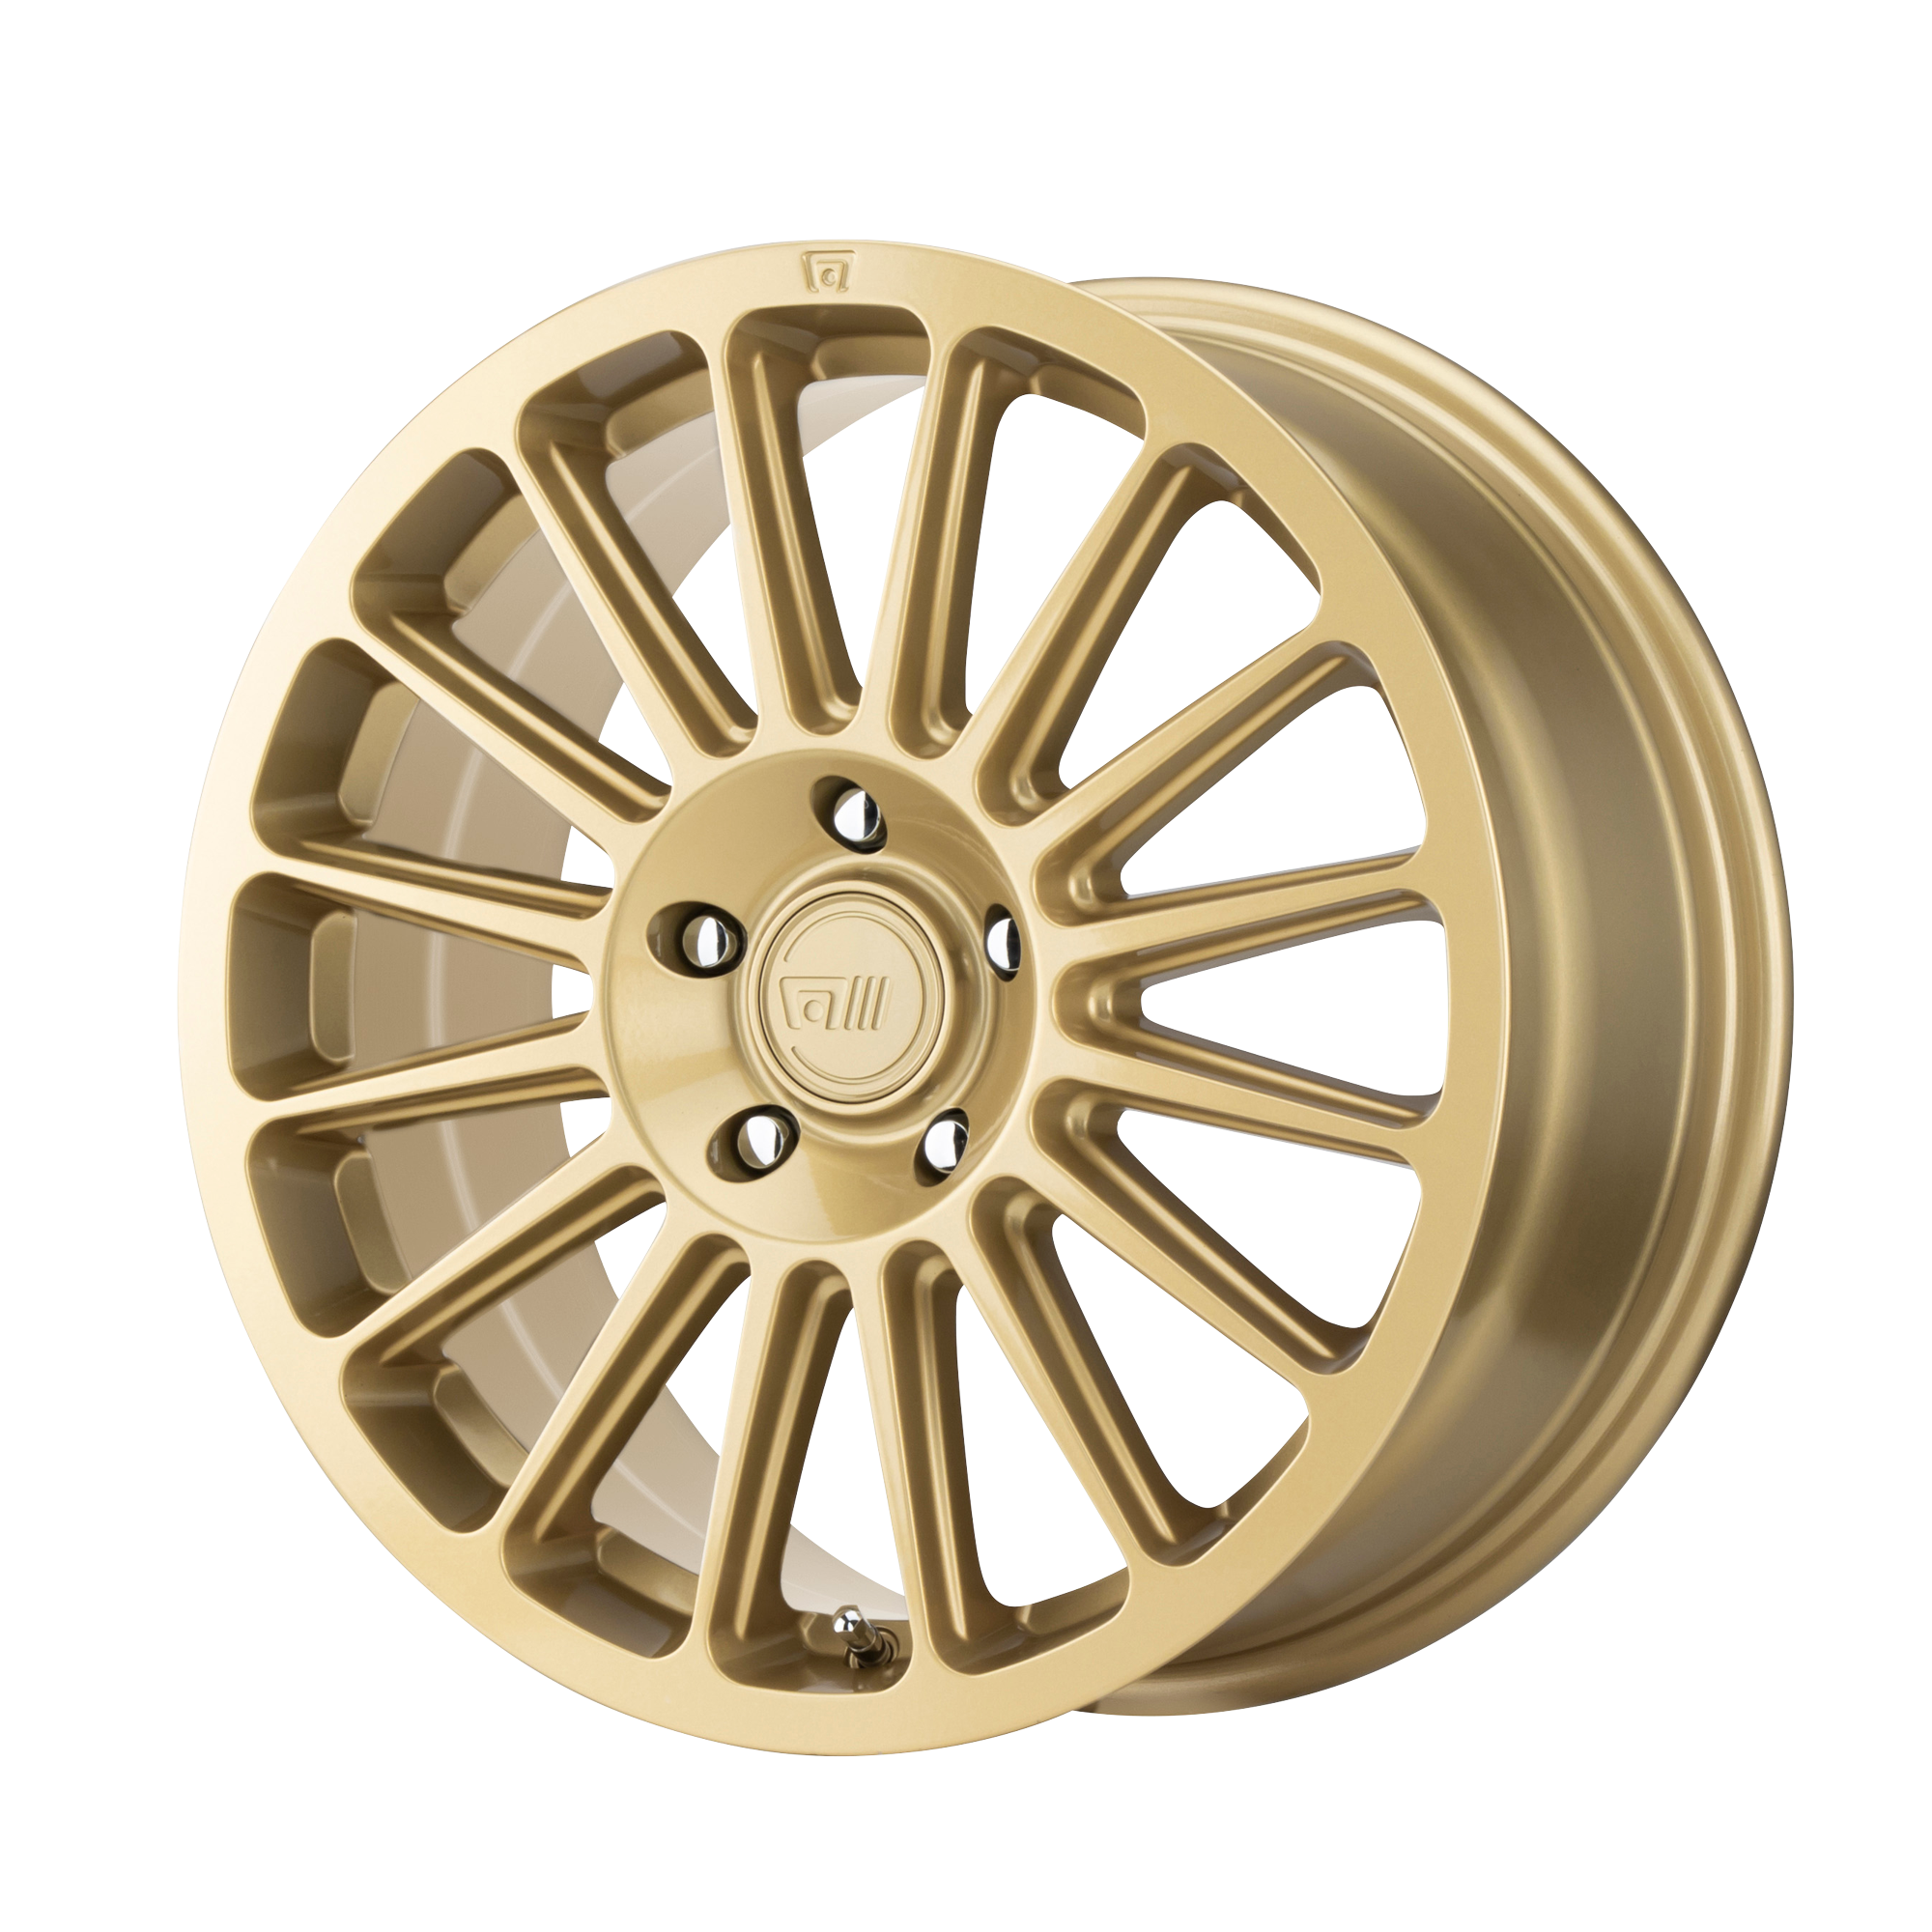 MR141 15x7 5x100.00 RALLY GOLD (15 mm) - Tires and Engine Performance